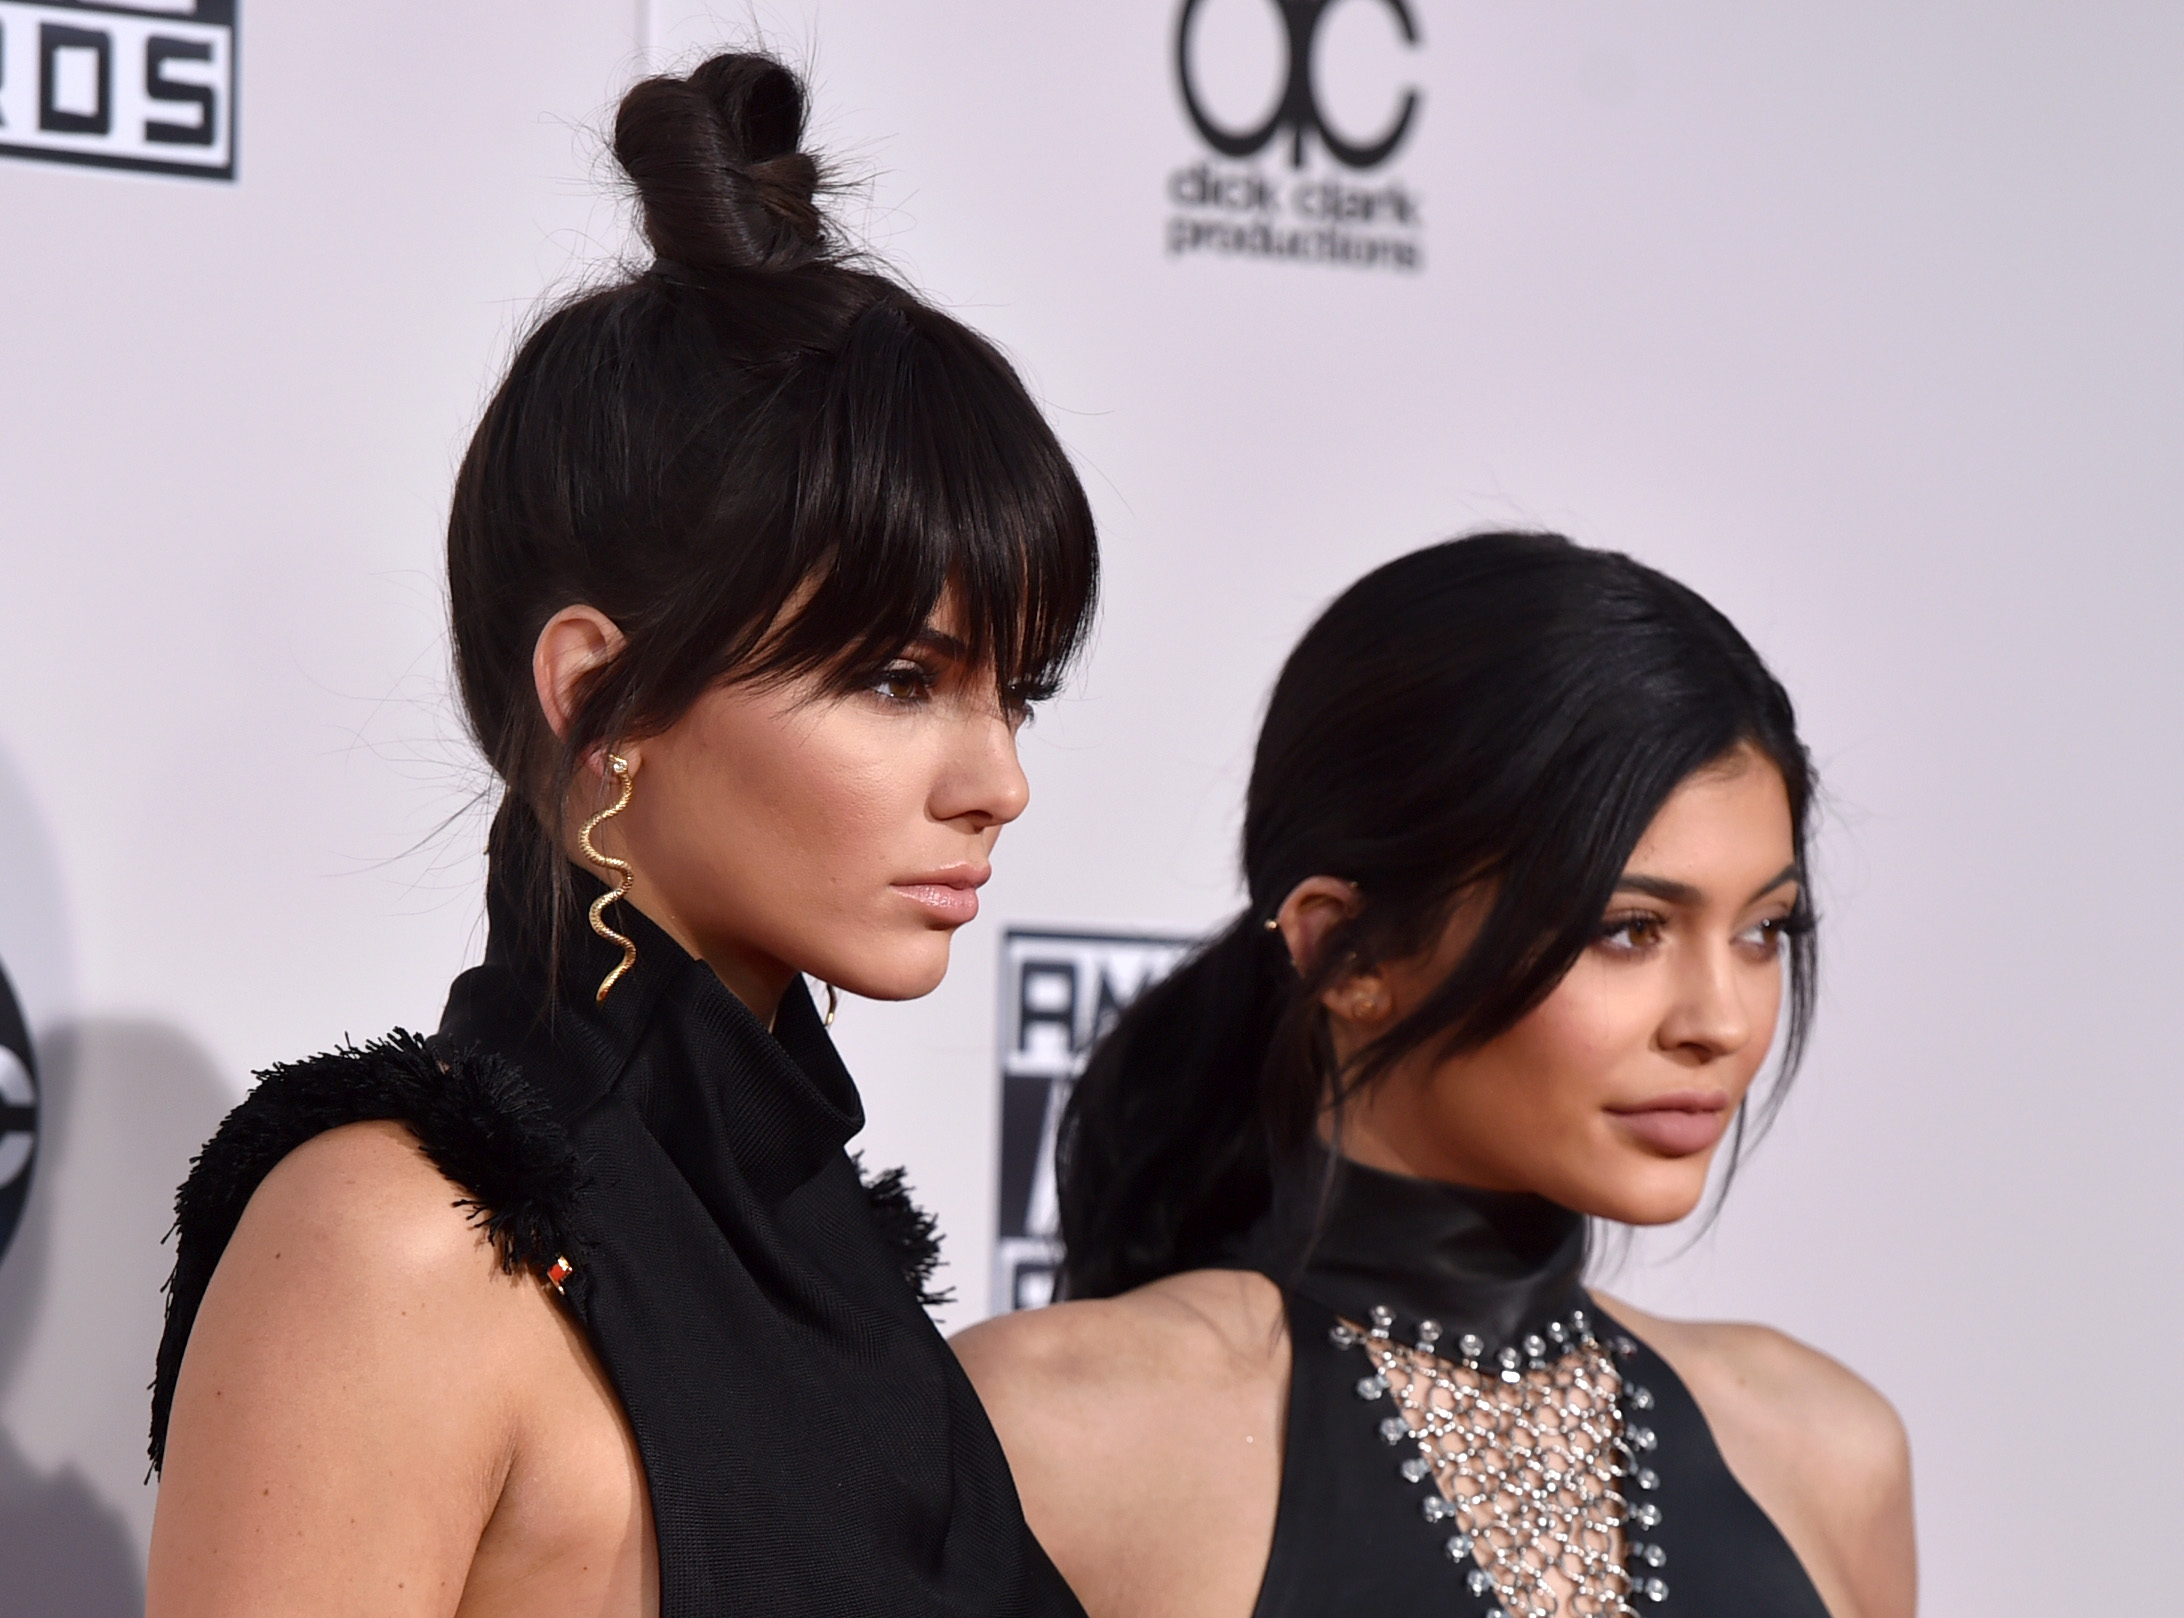 Kendall and Kylie Jenner at the 2015 American Music Awards on November 22, 2015, in Los Angeles, California. | Source: Getty Images